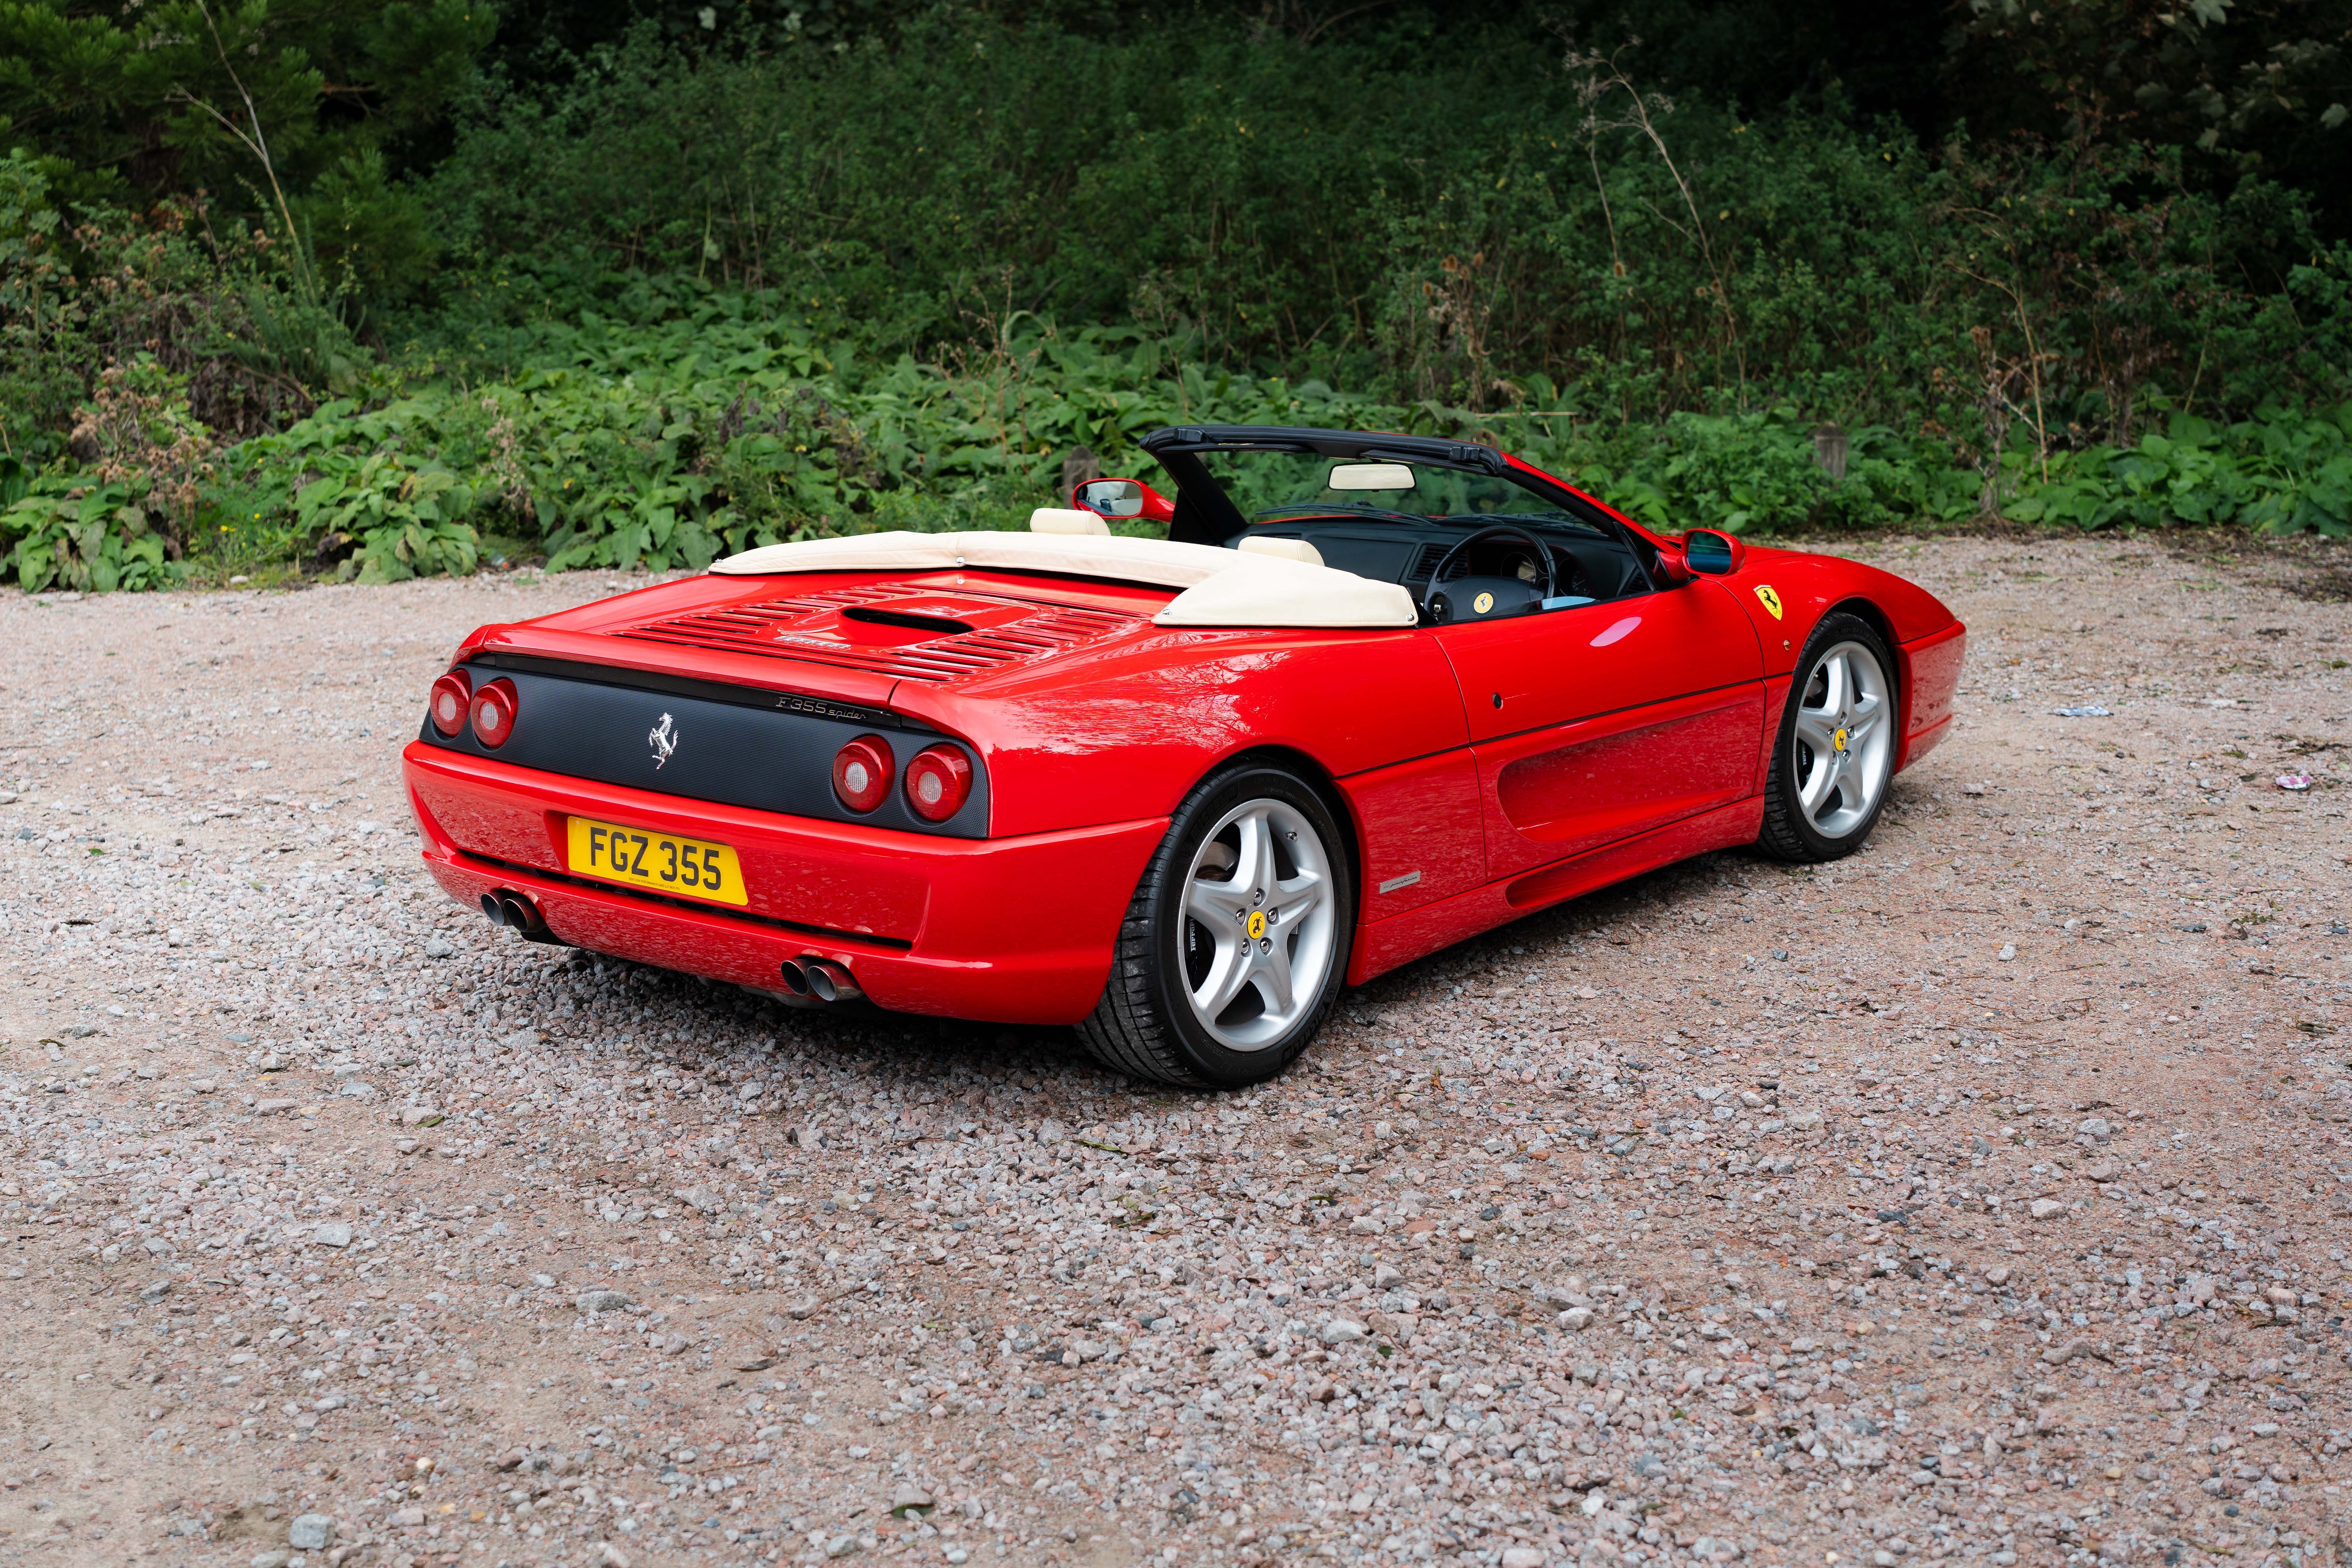 1996 Ferrari F355 Spider - Manual for sale by auction in Braintree 